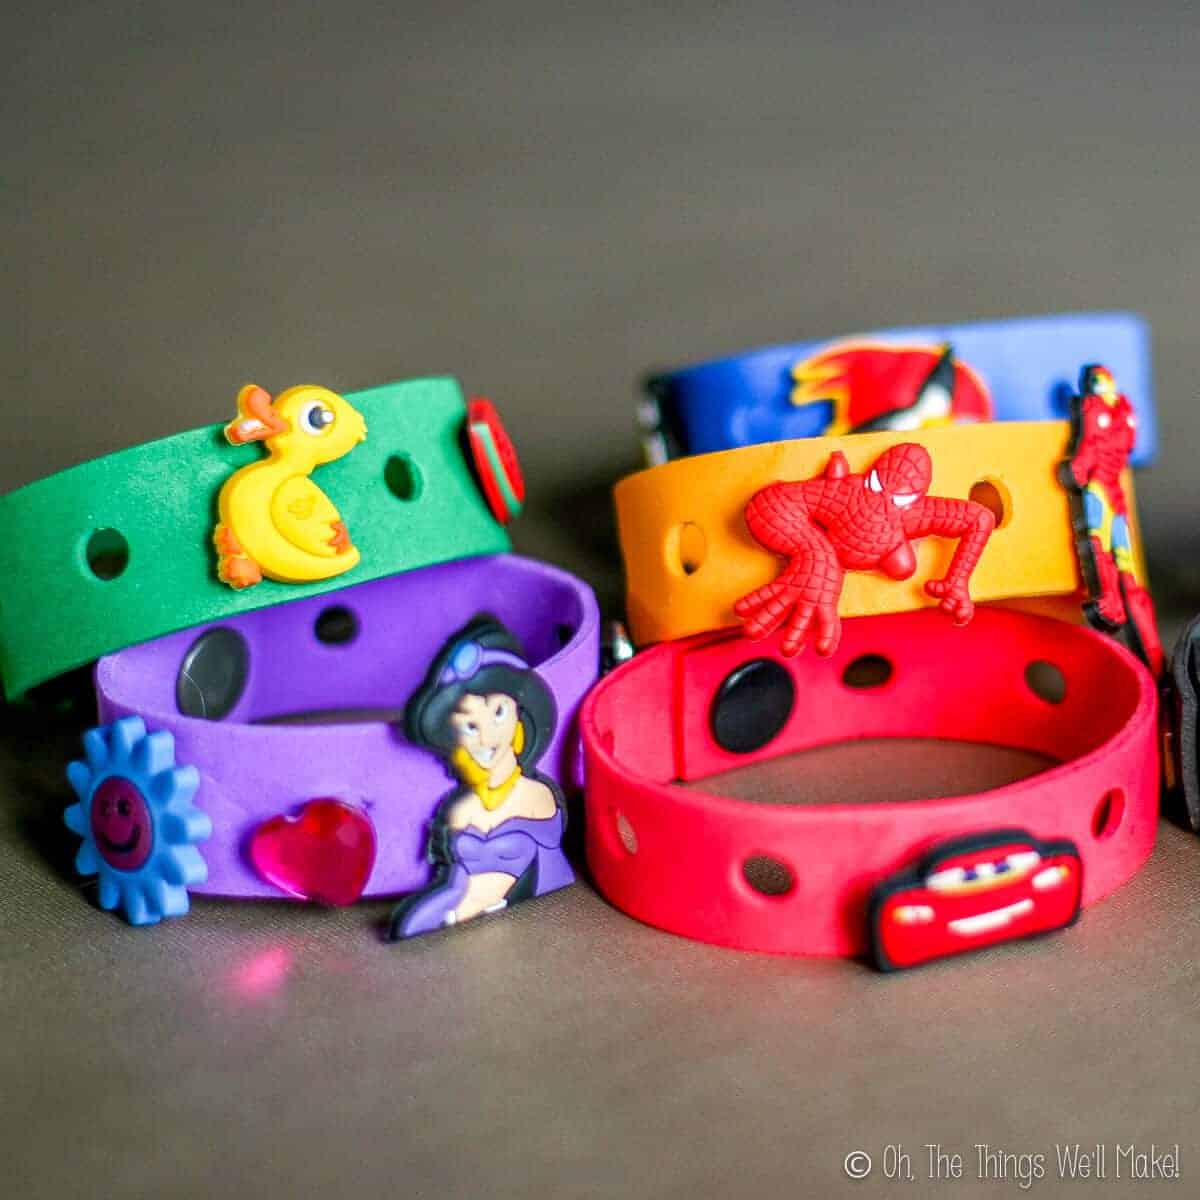 homemade craft foam bracelets in several colors with Crocs charms (Jibbitz) on them